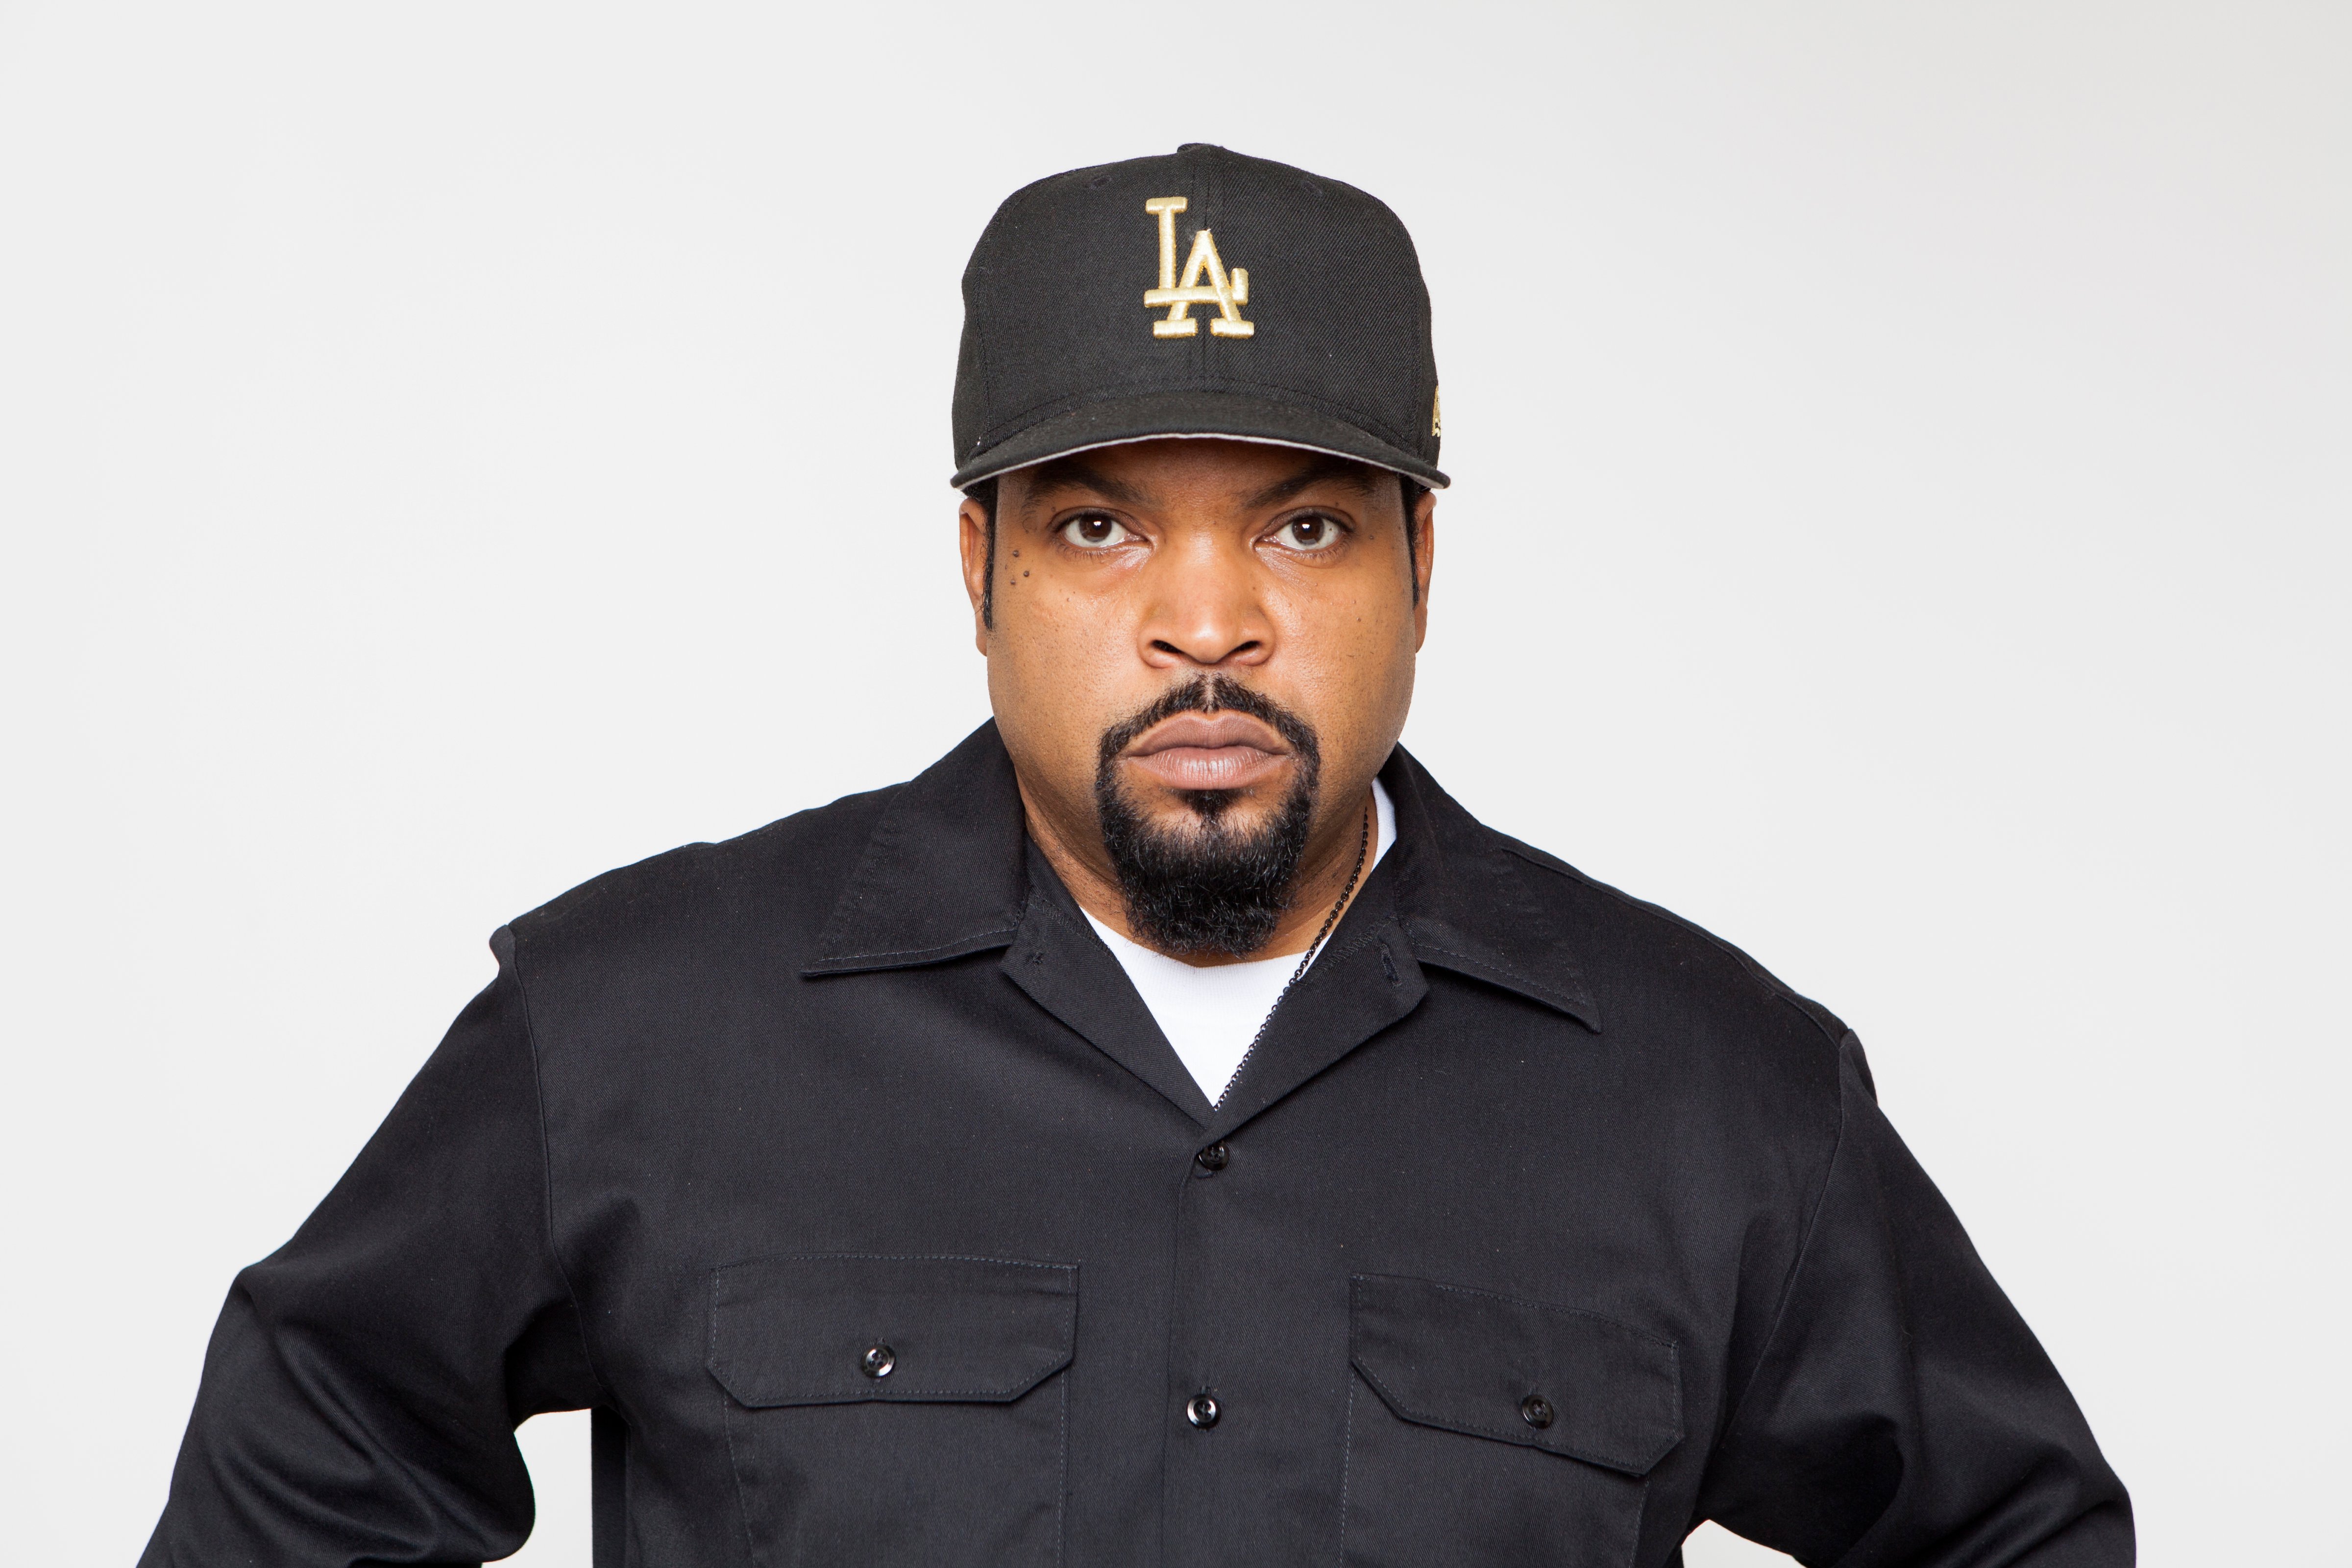 Ice Cube poses for a portrait in promotion of the new film “Straight Outta Compton" at the Four Seasons Hotel in Los Angeles on Aug. 2, 2015. (Rebecca Cabage—Invision/AP)